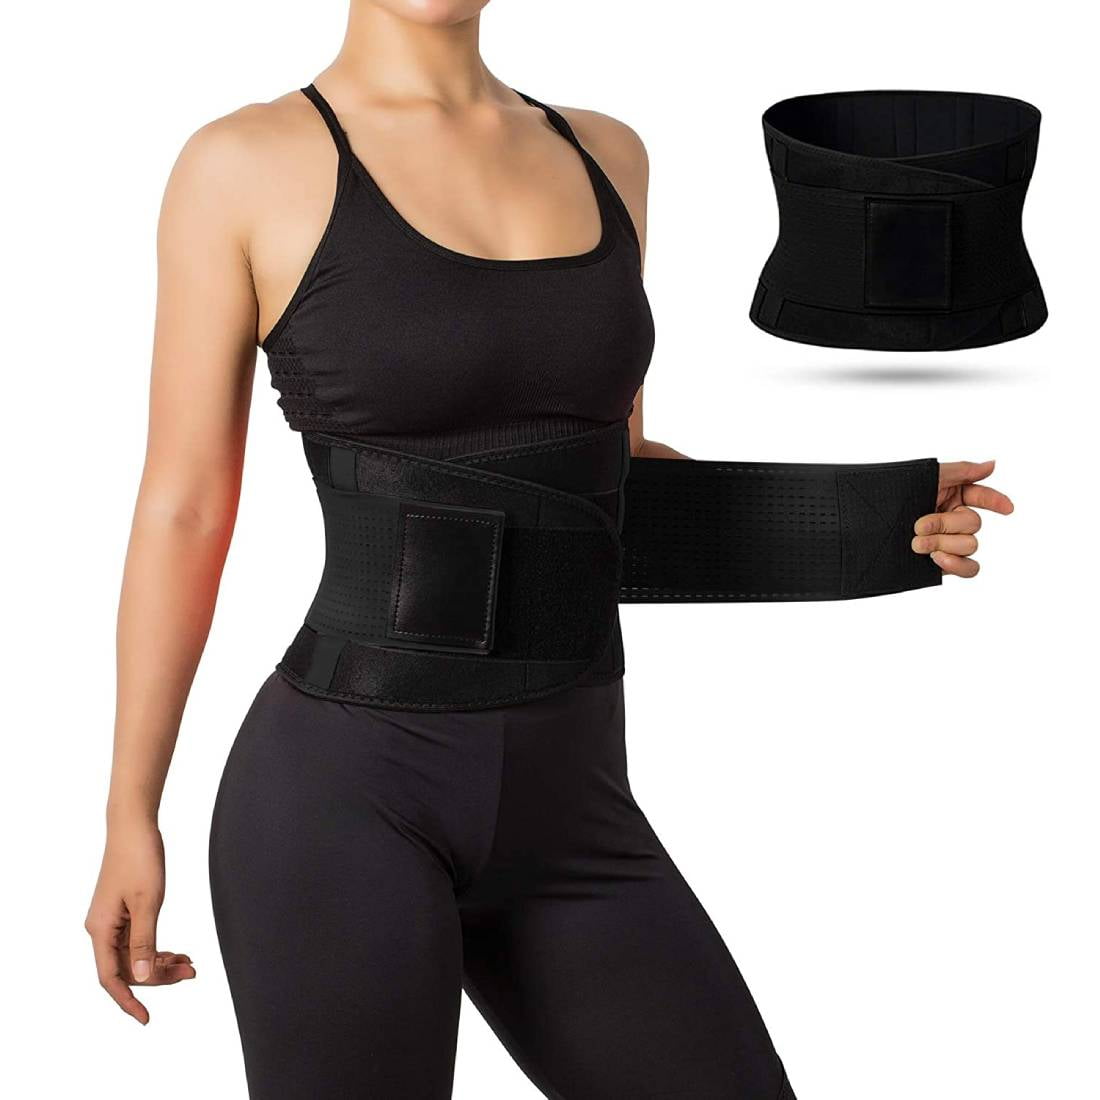 NEW Gold's Gym 8 Wide Waist Trimmer Fits Up to 50 Waist Hook